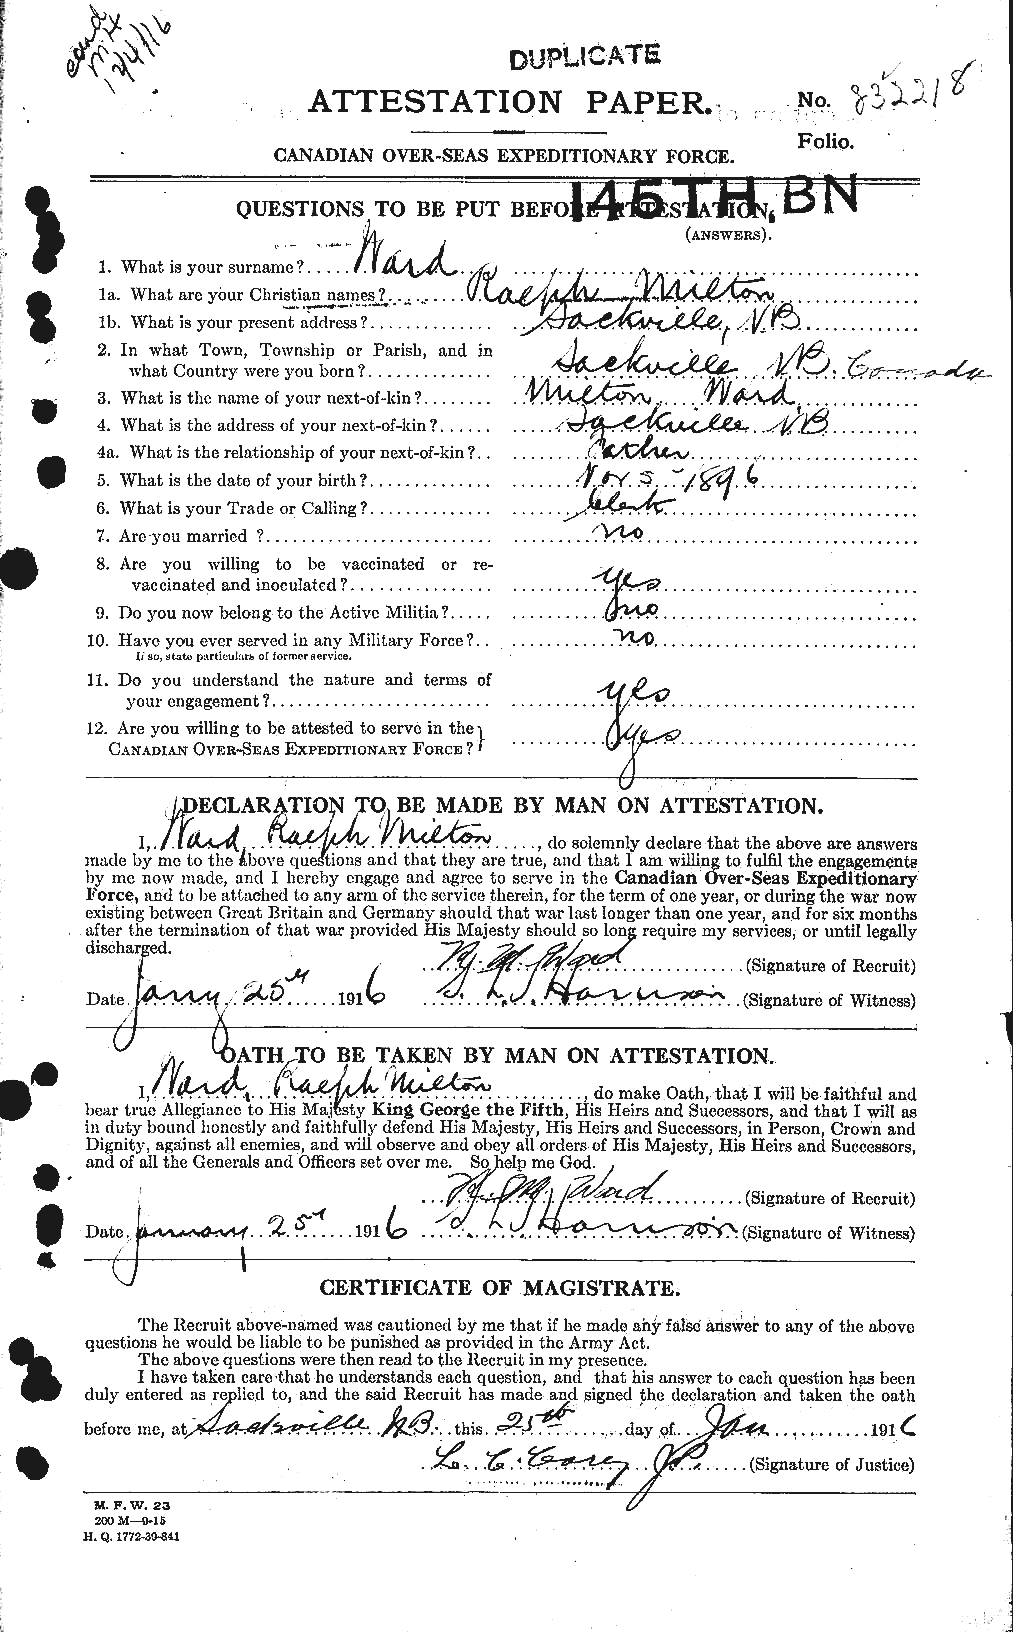 Personnel Records of the First World War - CEF 659634a